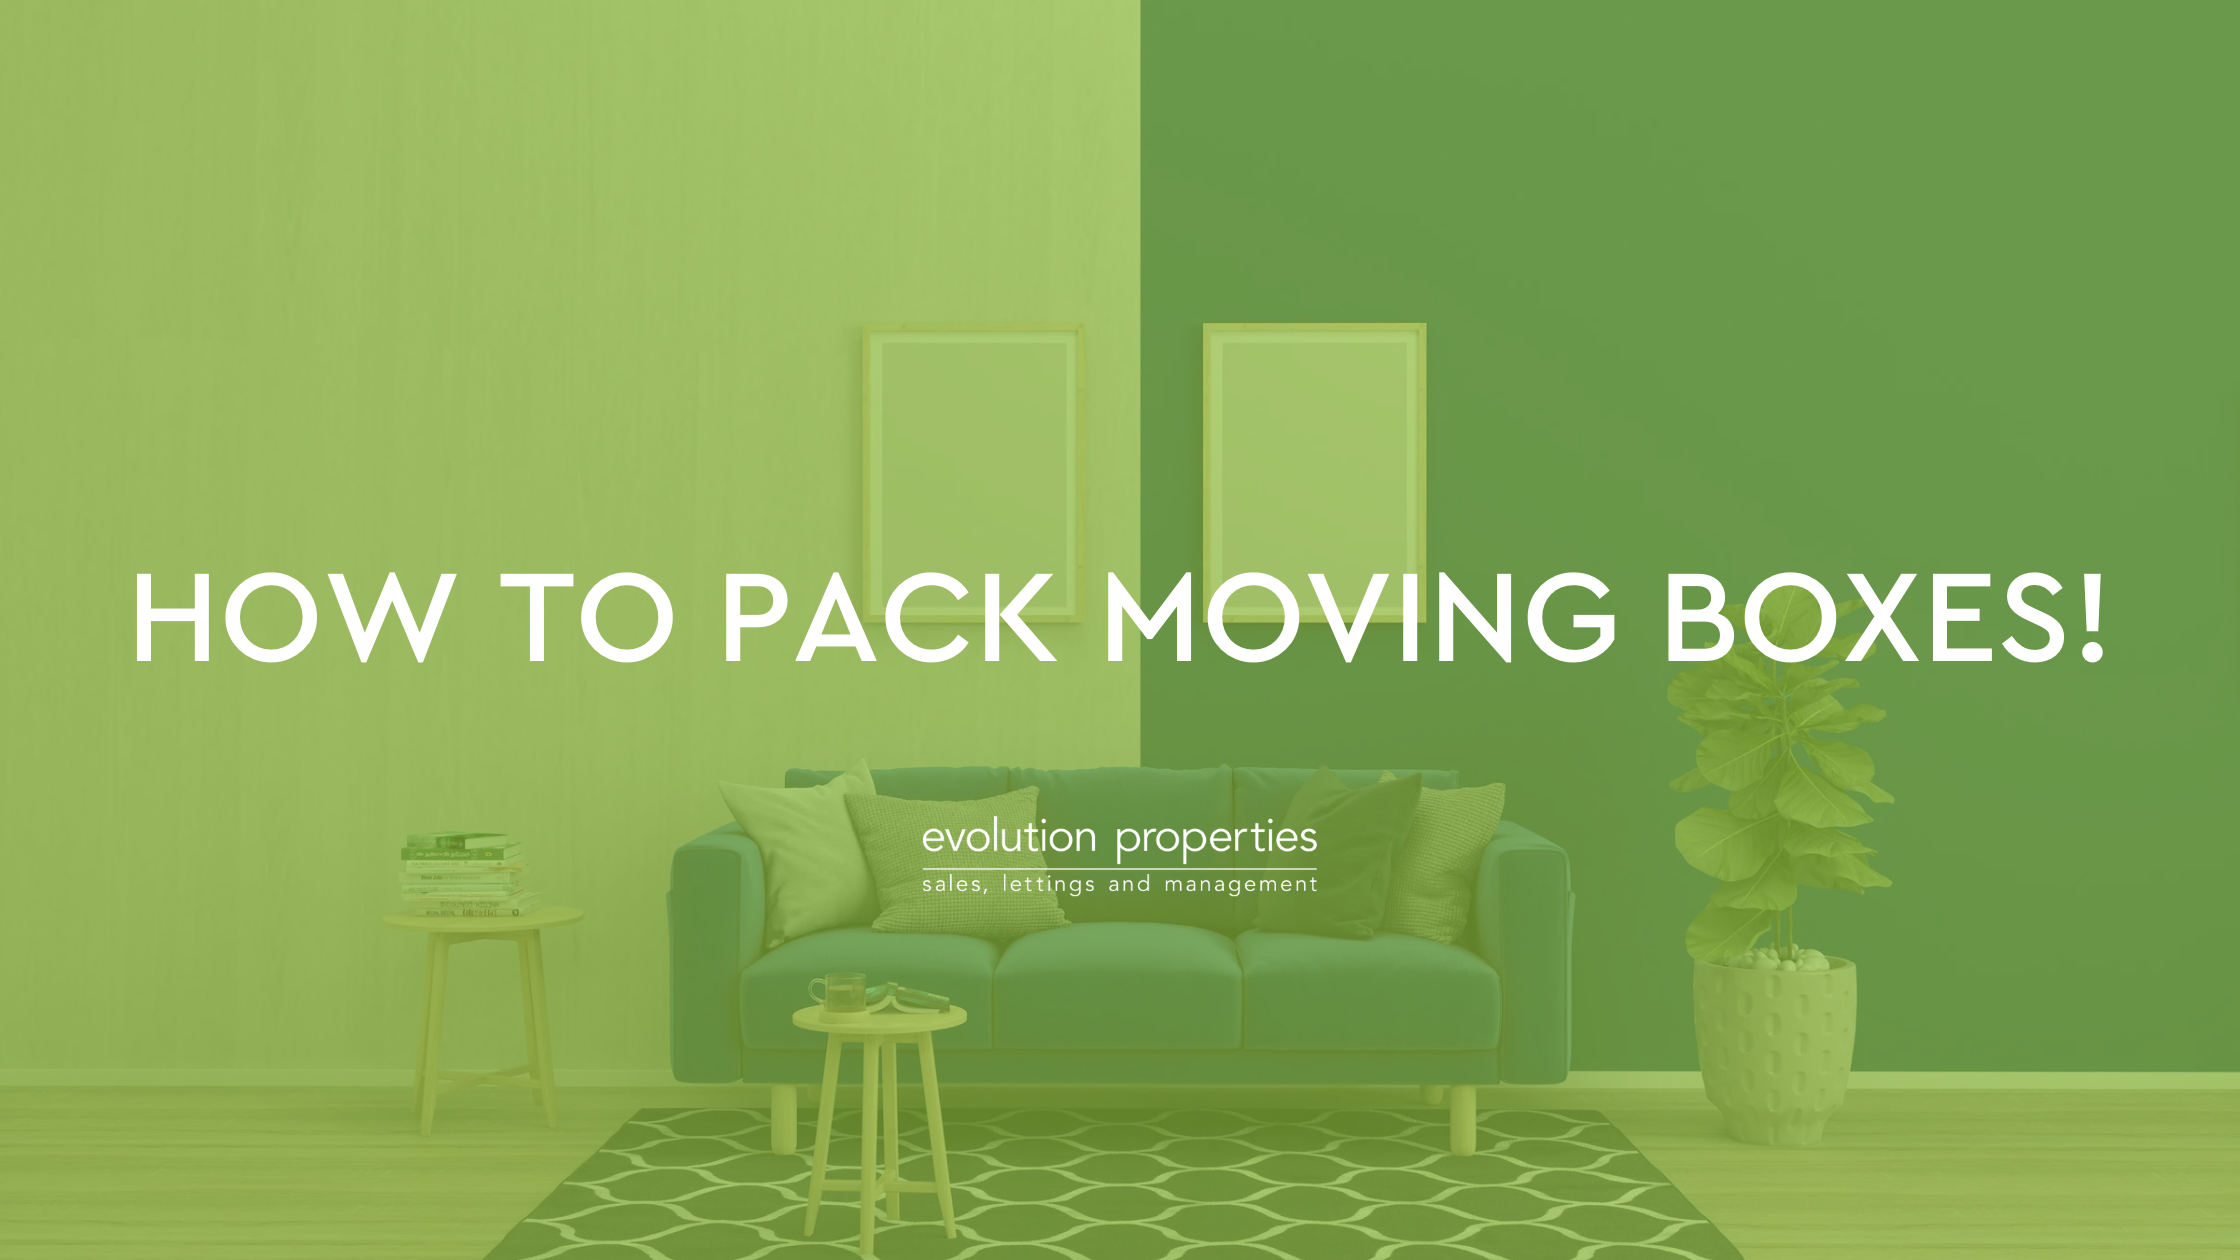 How to pack moving boxes!